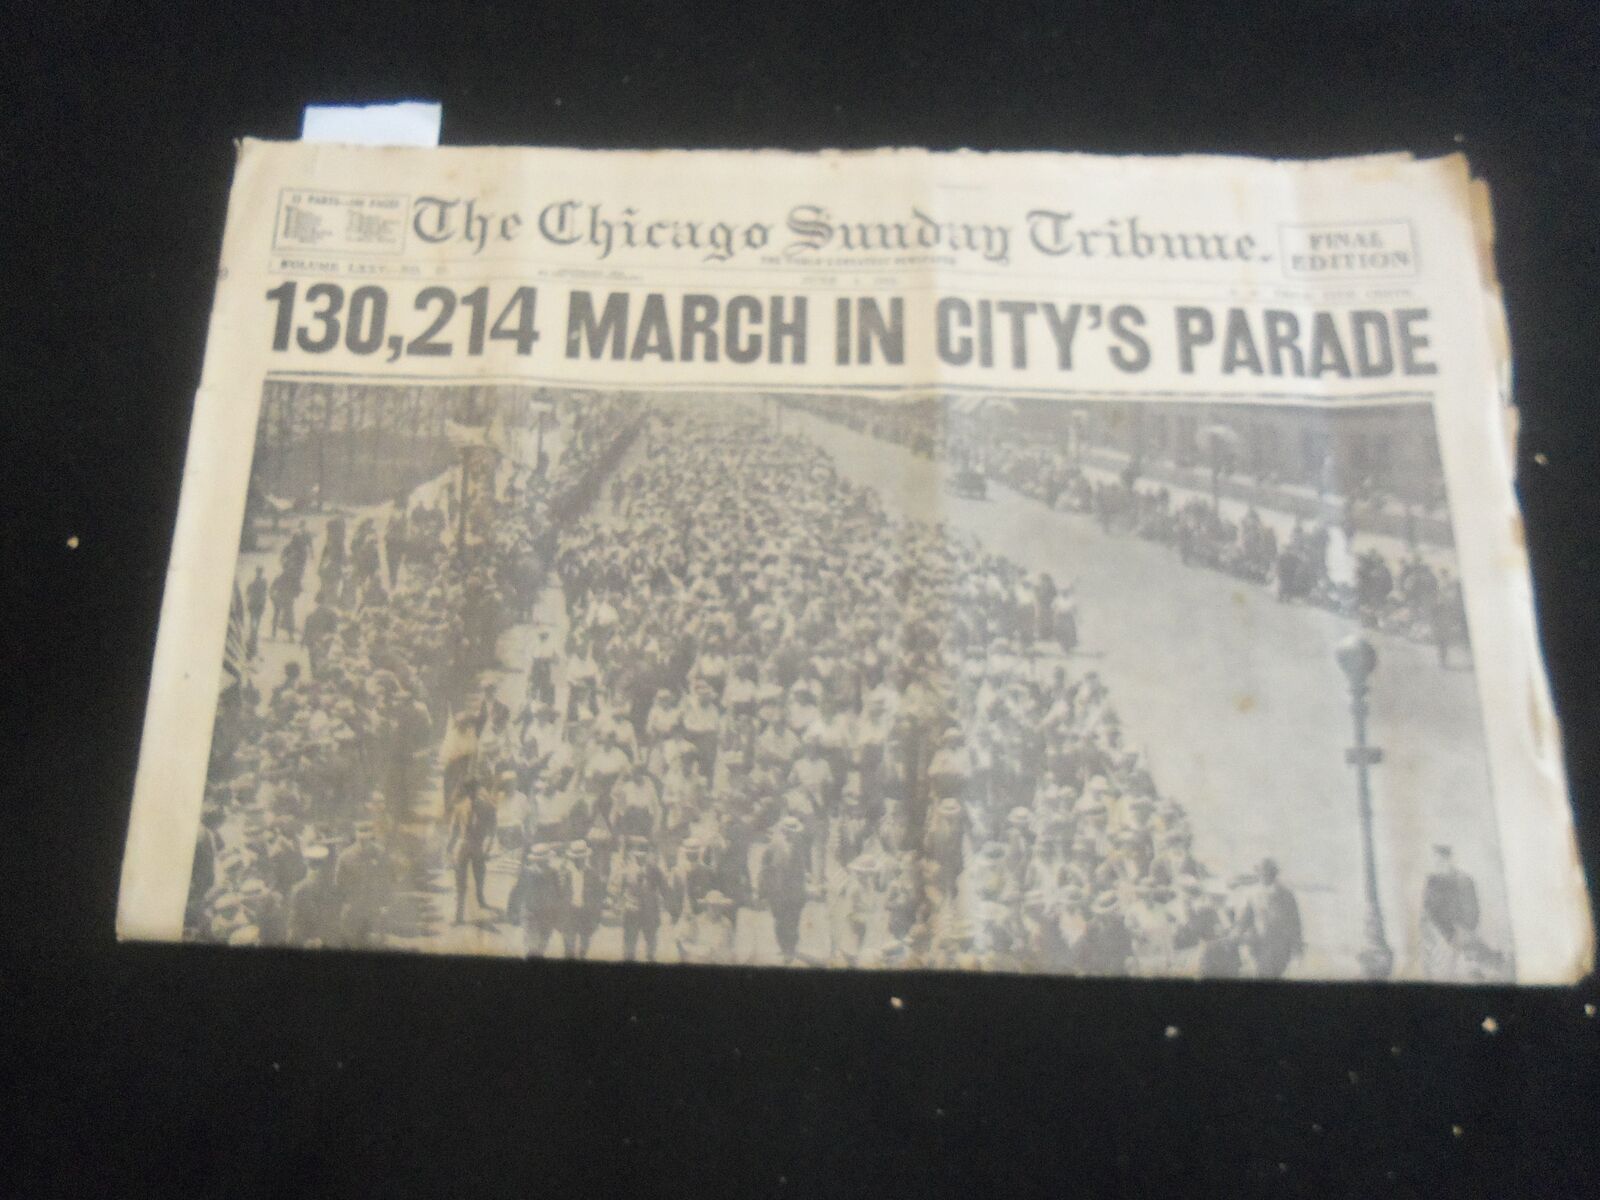 1916 CHICAGO SUNDAY TRIBUNE NEWSPAPER - 130,214 MARCH IN CITY\'S PARADE - NP 5760